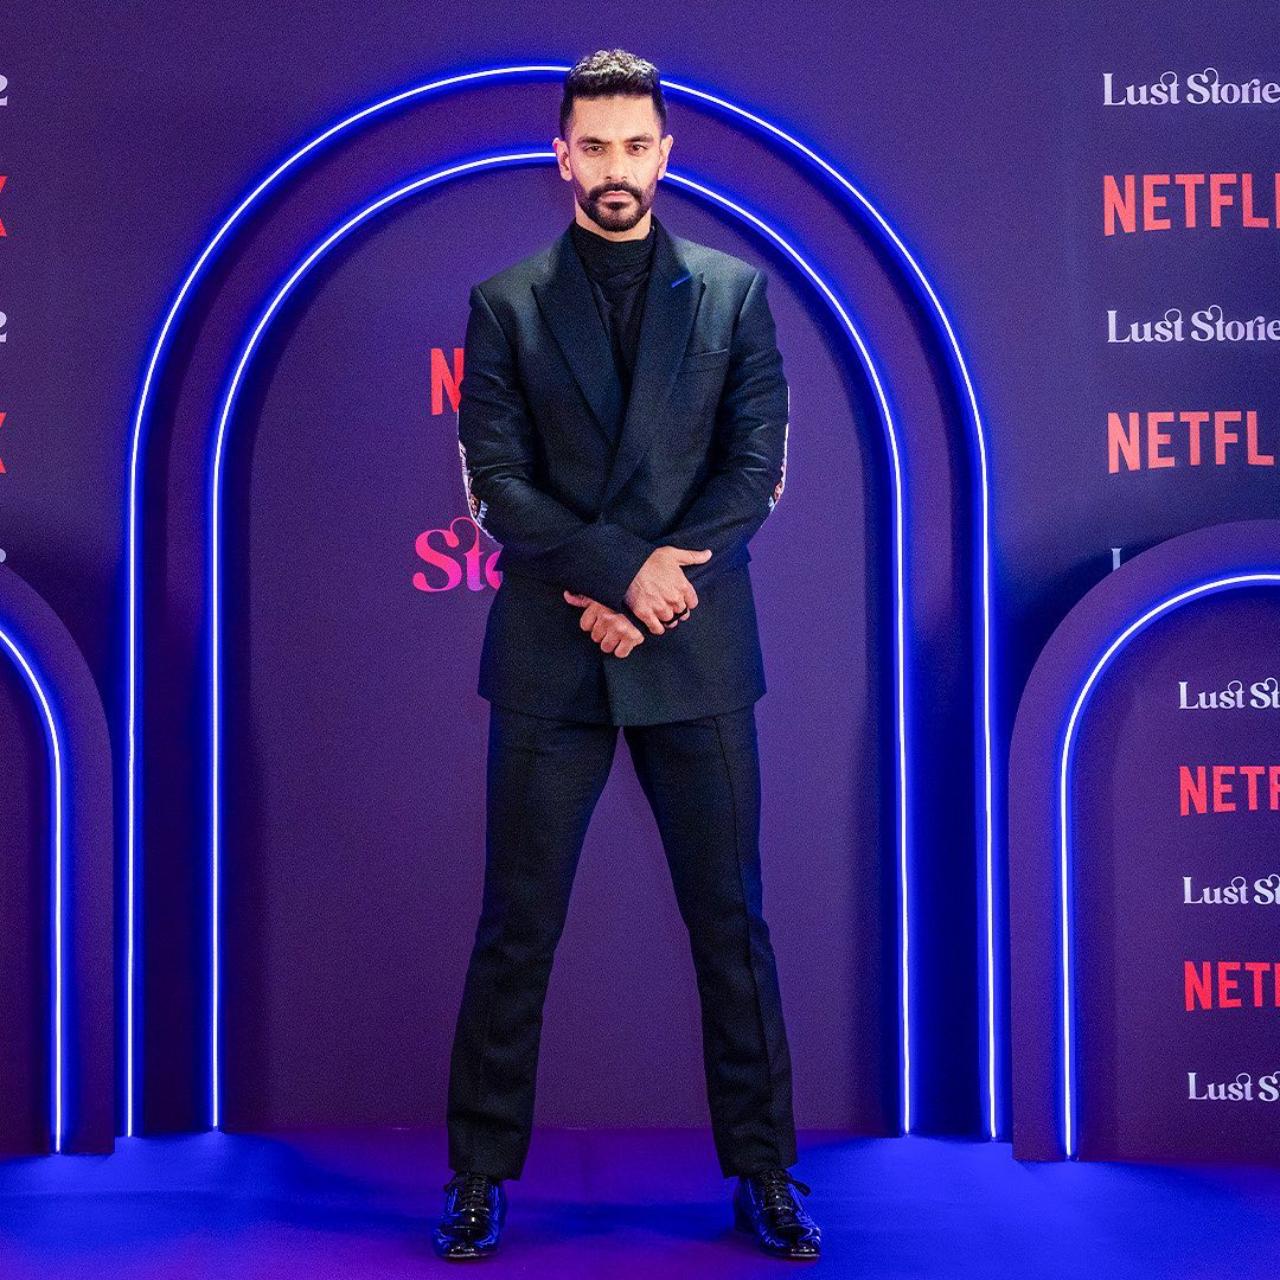 Angad Bedi looked dapper in an all-black suit. His pairing with Mrunal Thakur is one of the highlights of the anthology